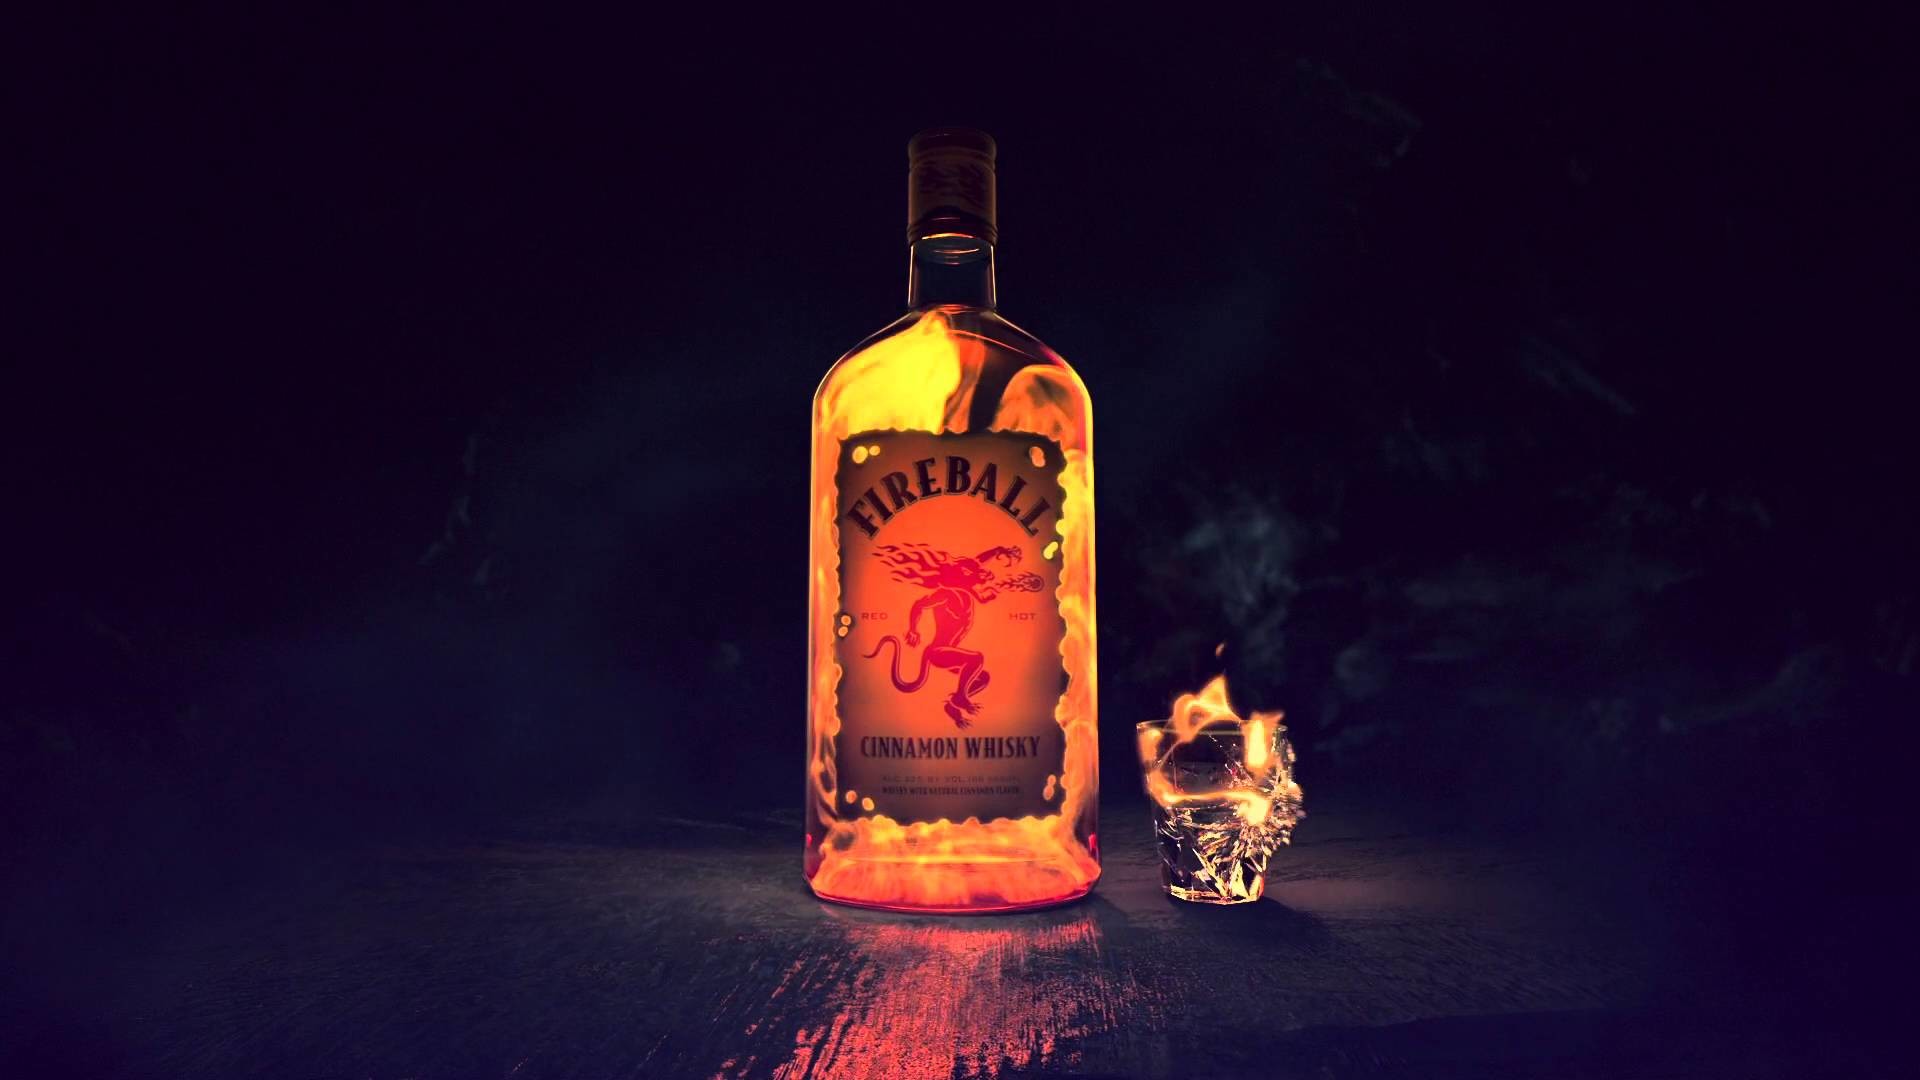 Res - 2048x1536, - Fireball Whisky , HD Wallpaper & Backgrounds